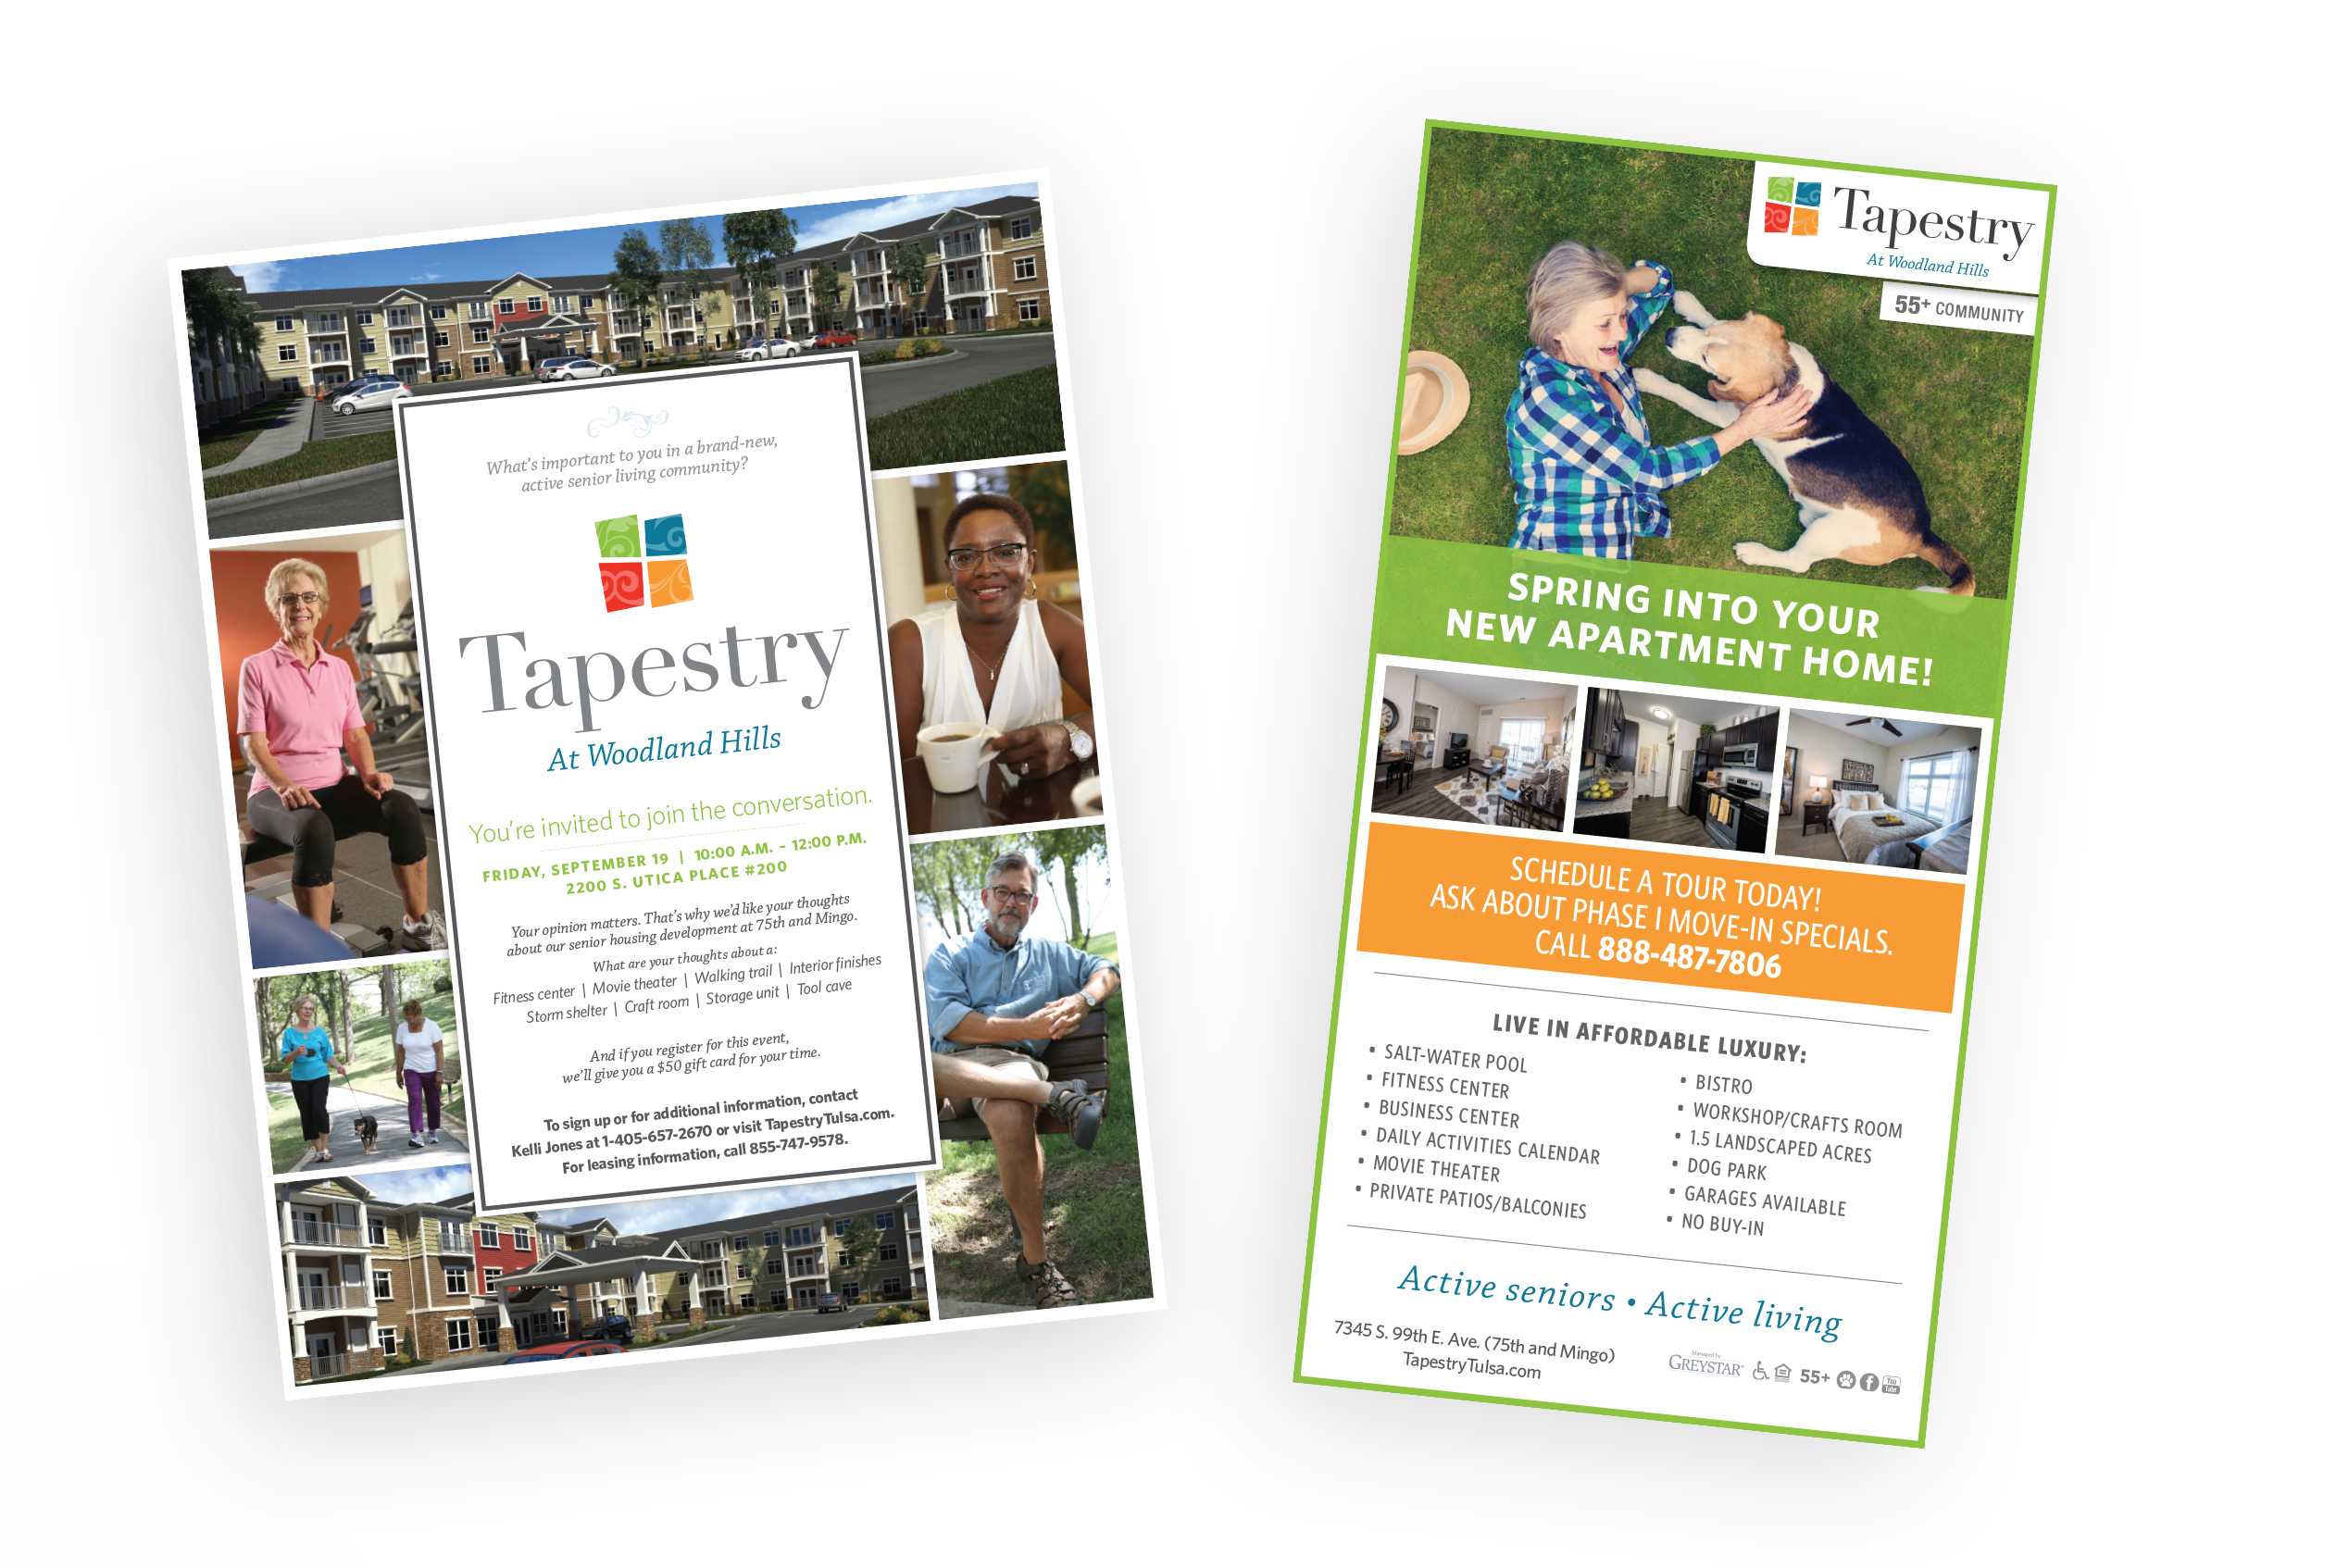 A mockup of marketing materials created by Acrobatant for Tapestry.